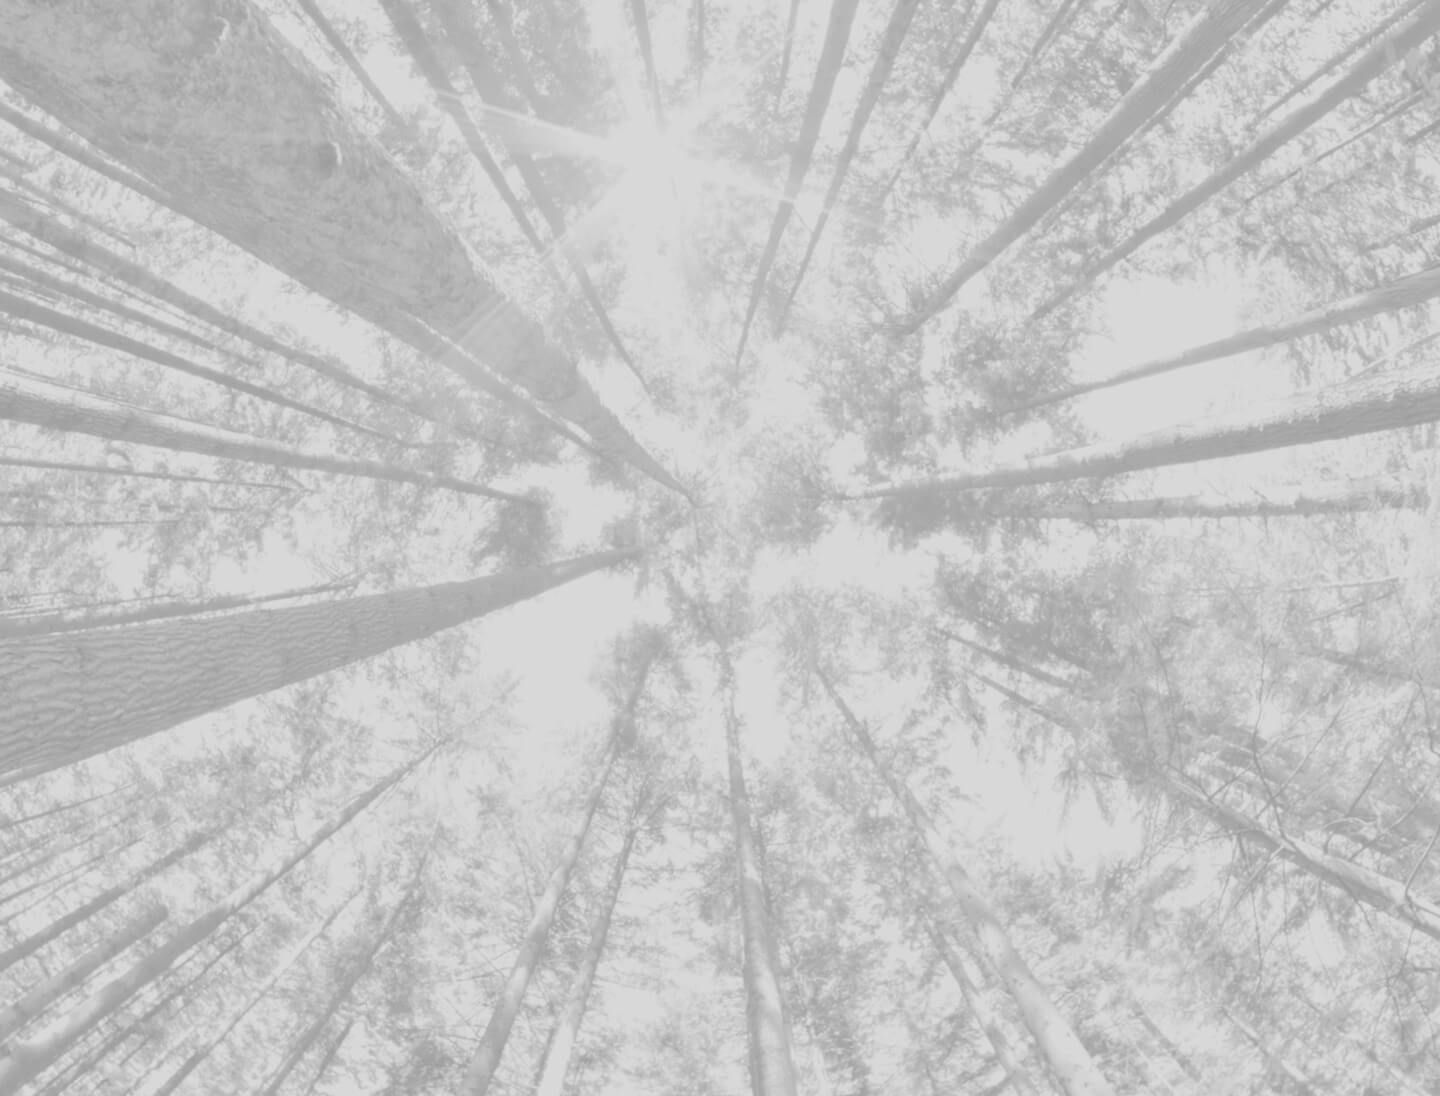 Trees all around, pointed directly at the sky. Picture taken from the forest floor perspective.